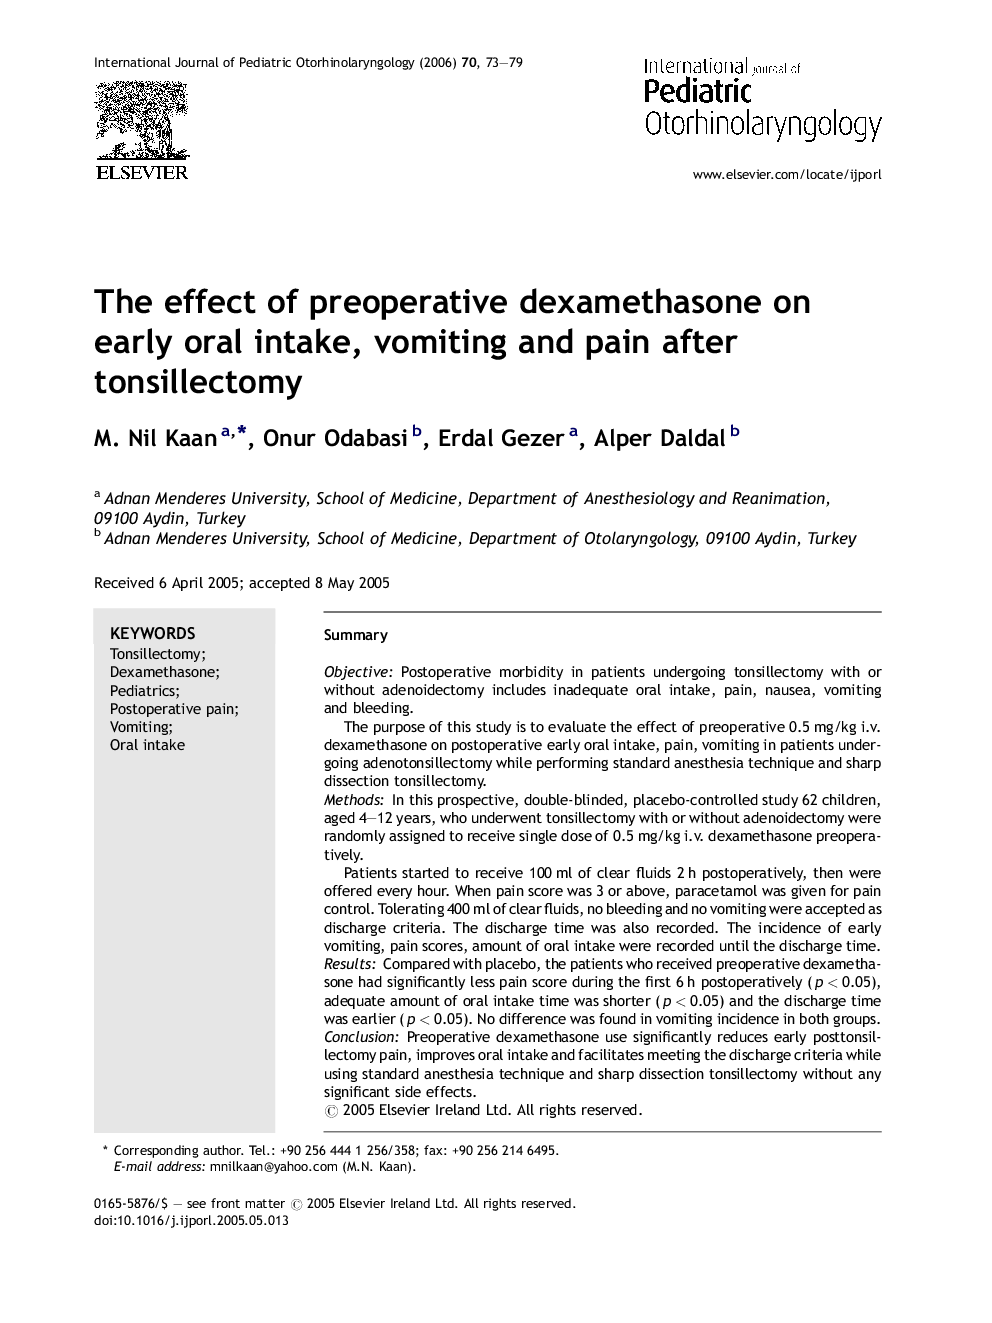 The effect of preoperative dexamethasone on early oral intake, vomiting and pain after tonsillectomy